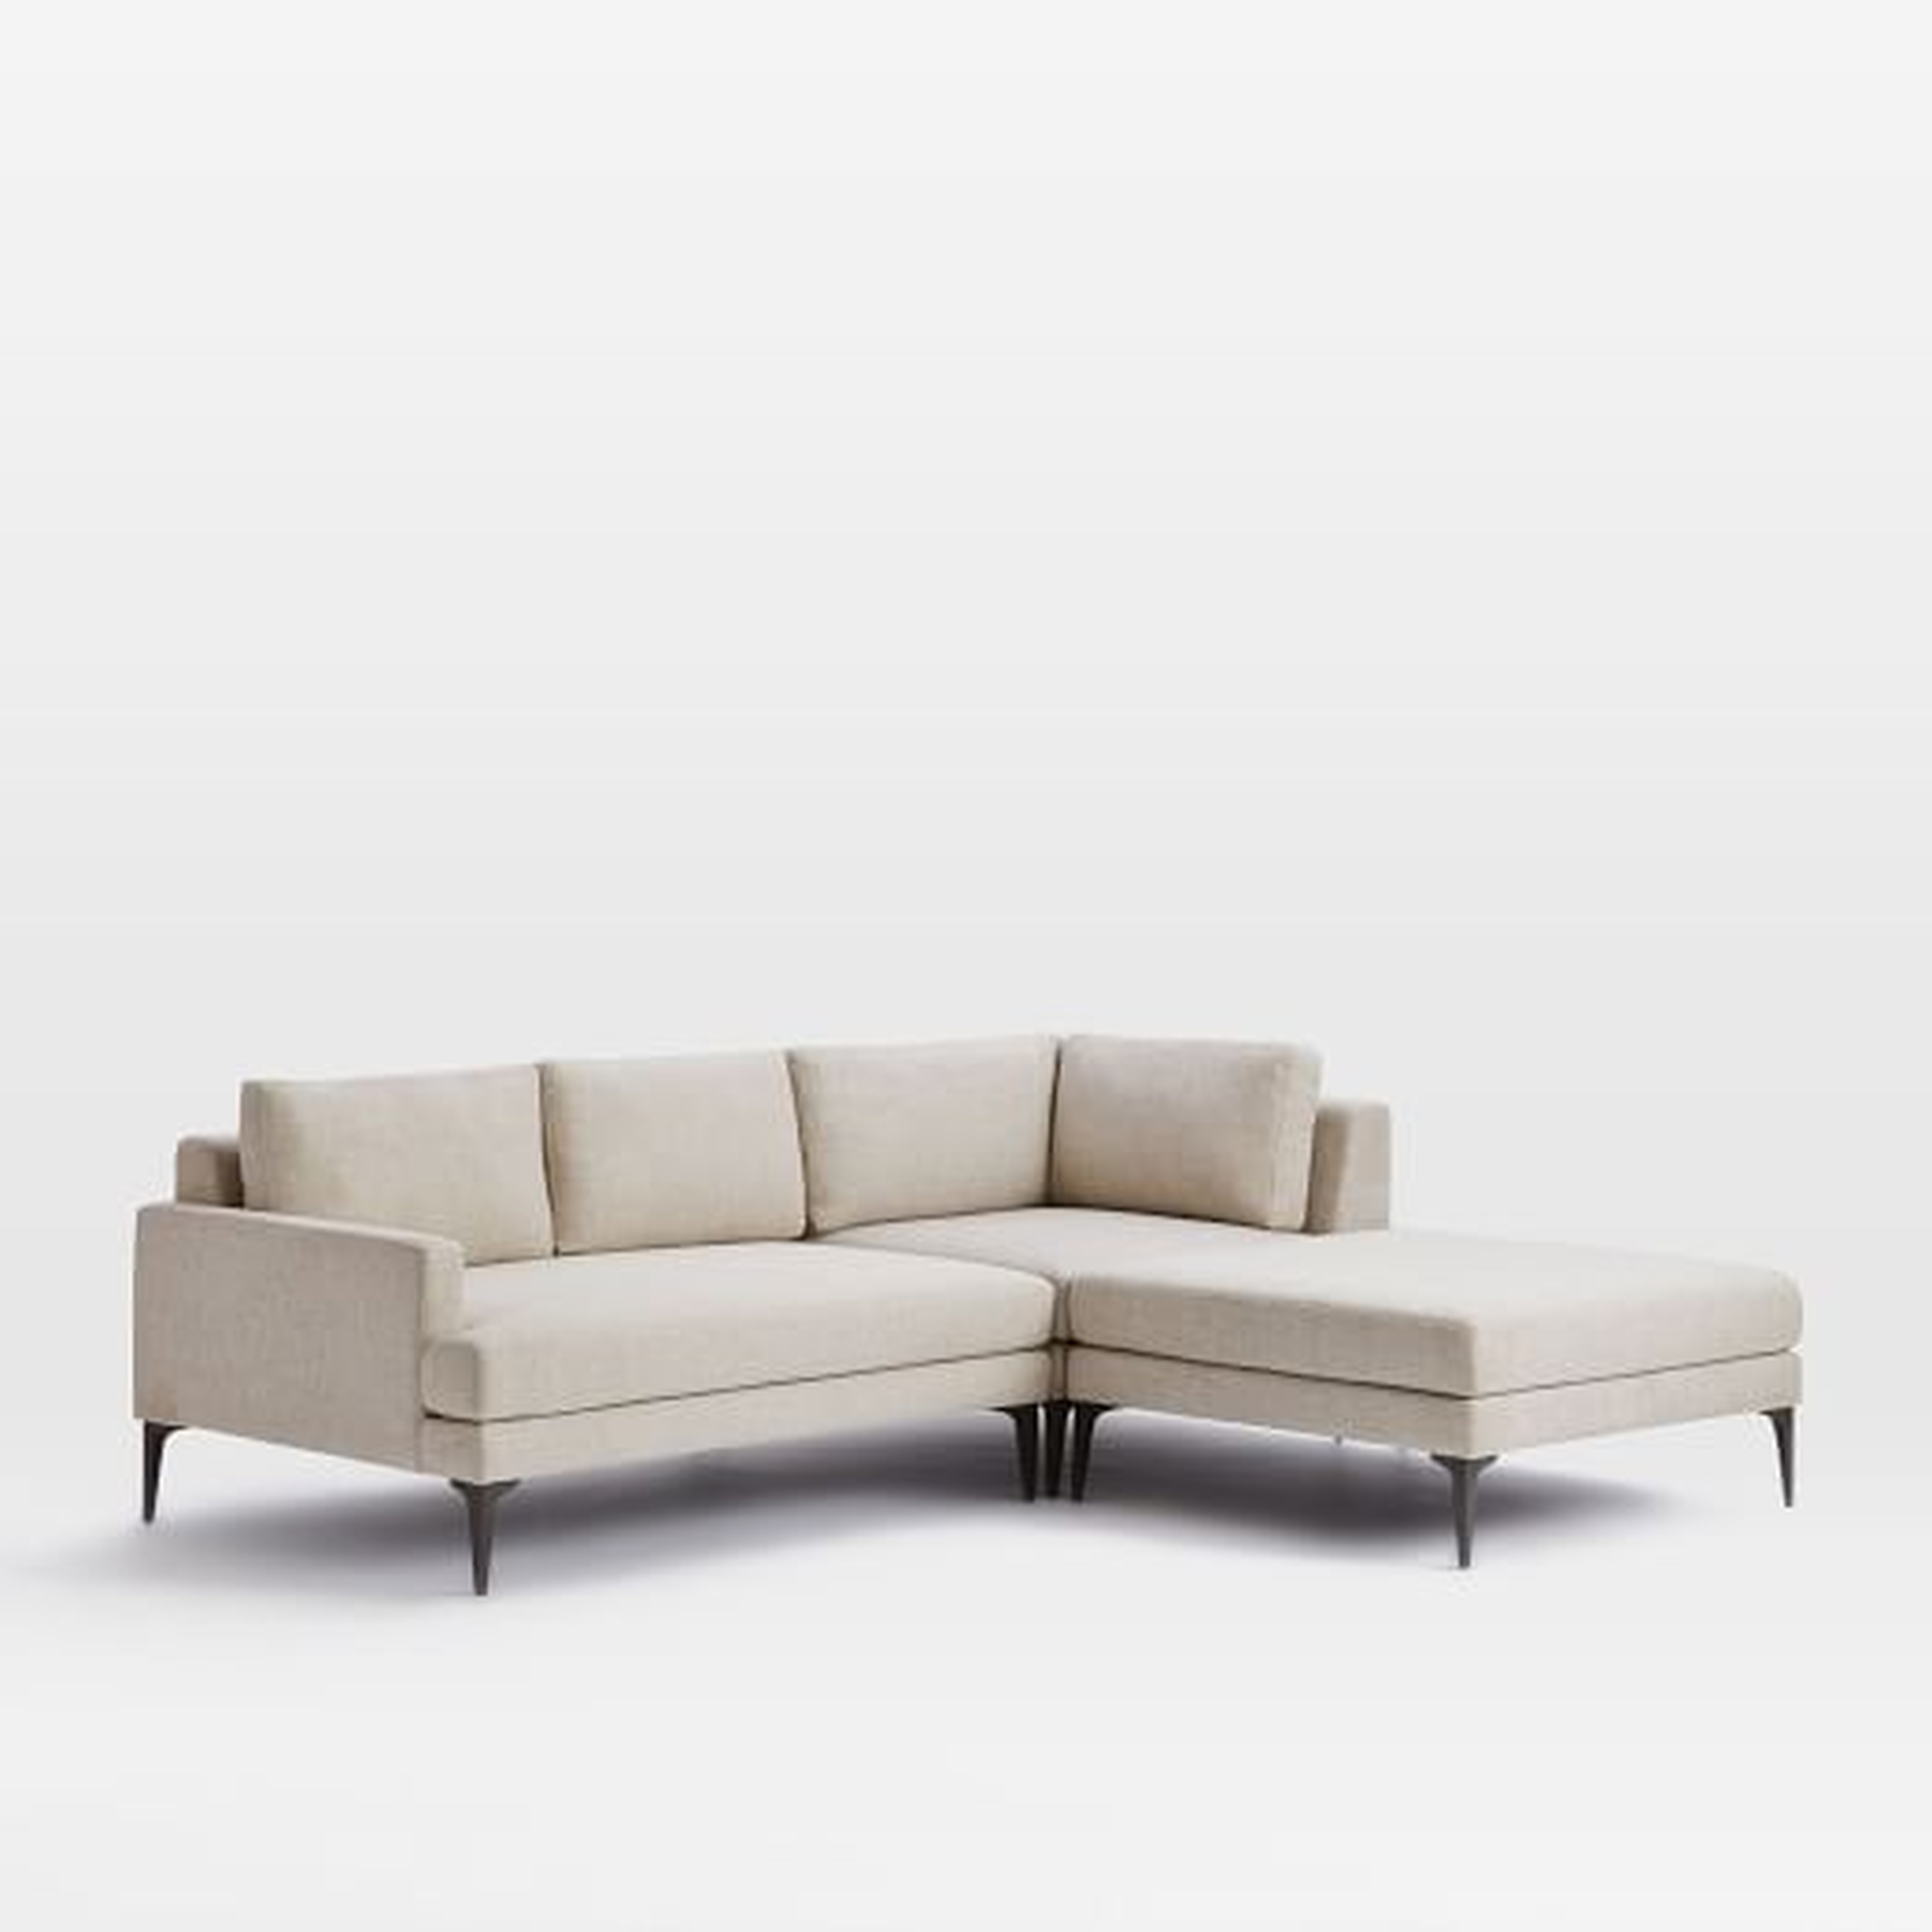 Andes 3-Piece Chaise Sectional - Left-Arm Sofa & Ottoman & Right-Arm Corner - West Elm